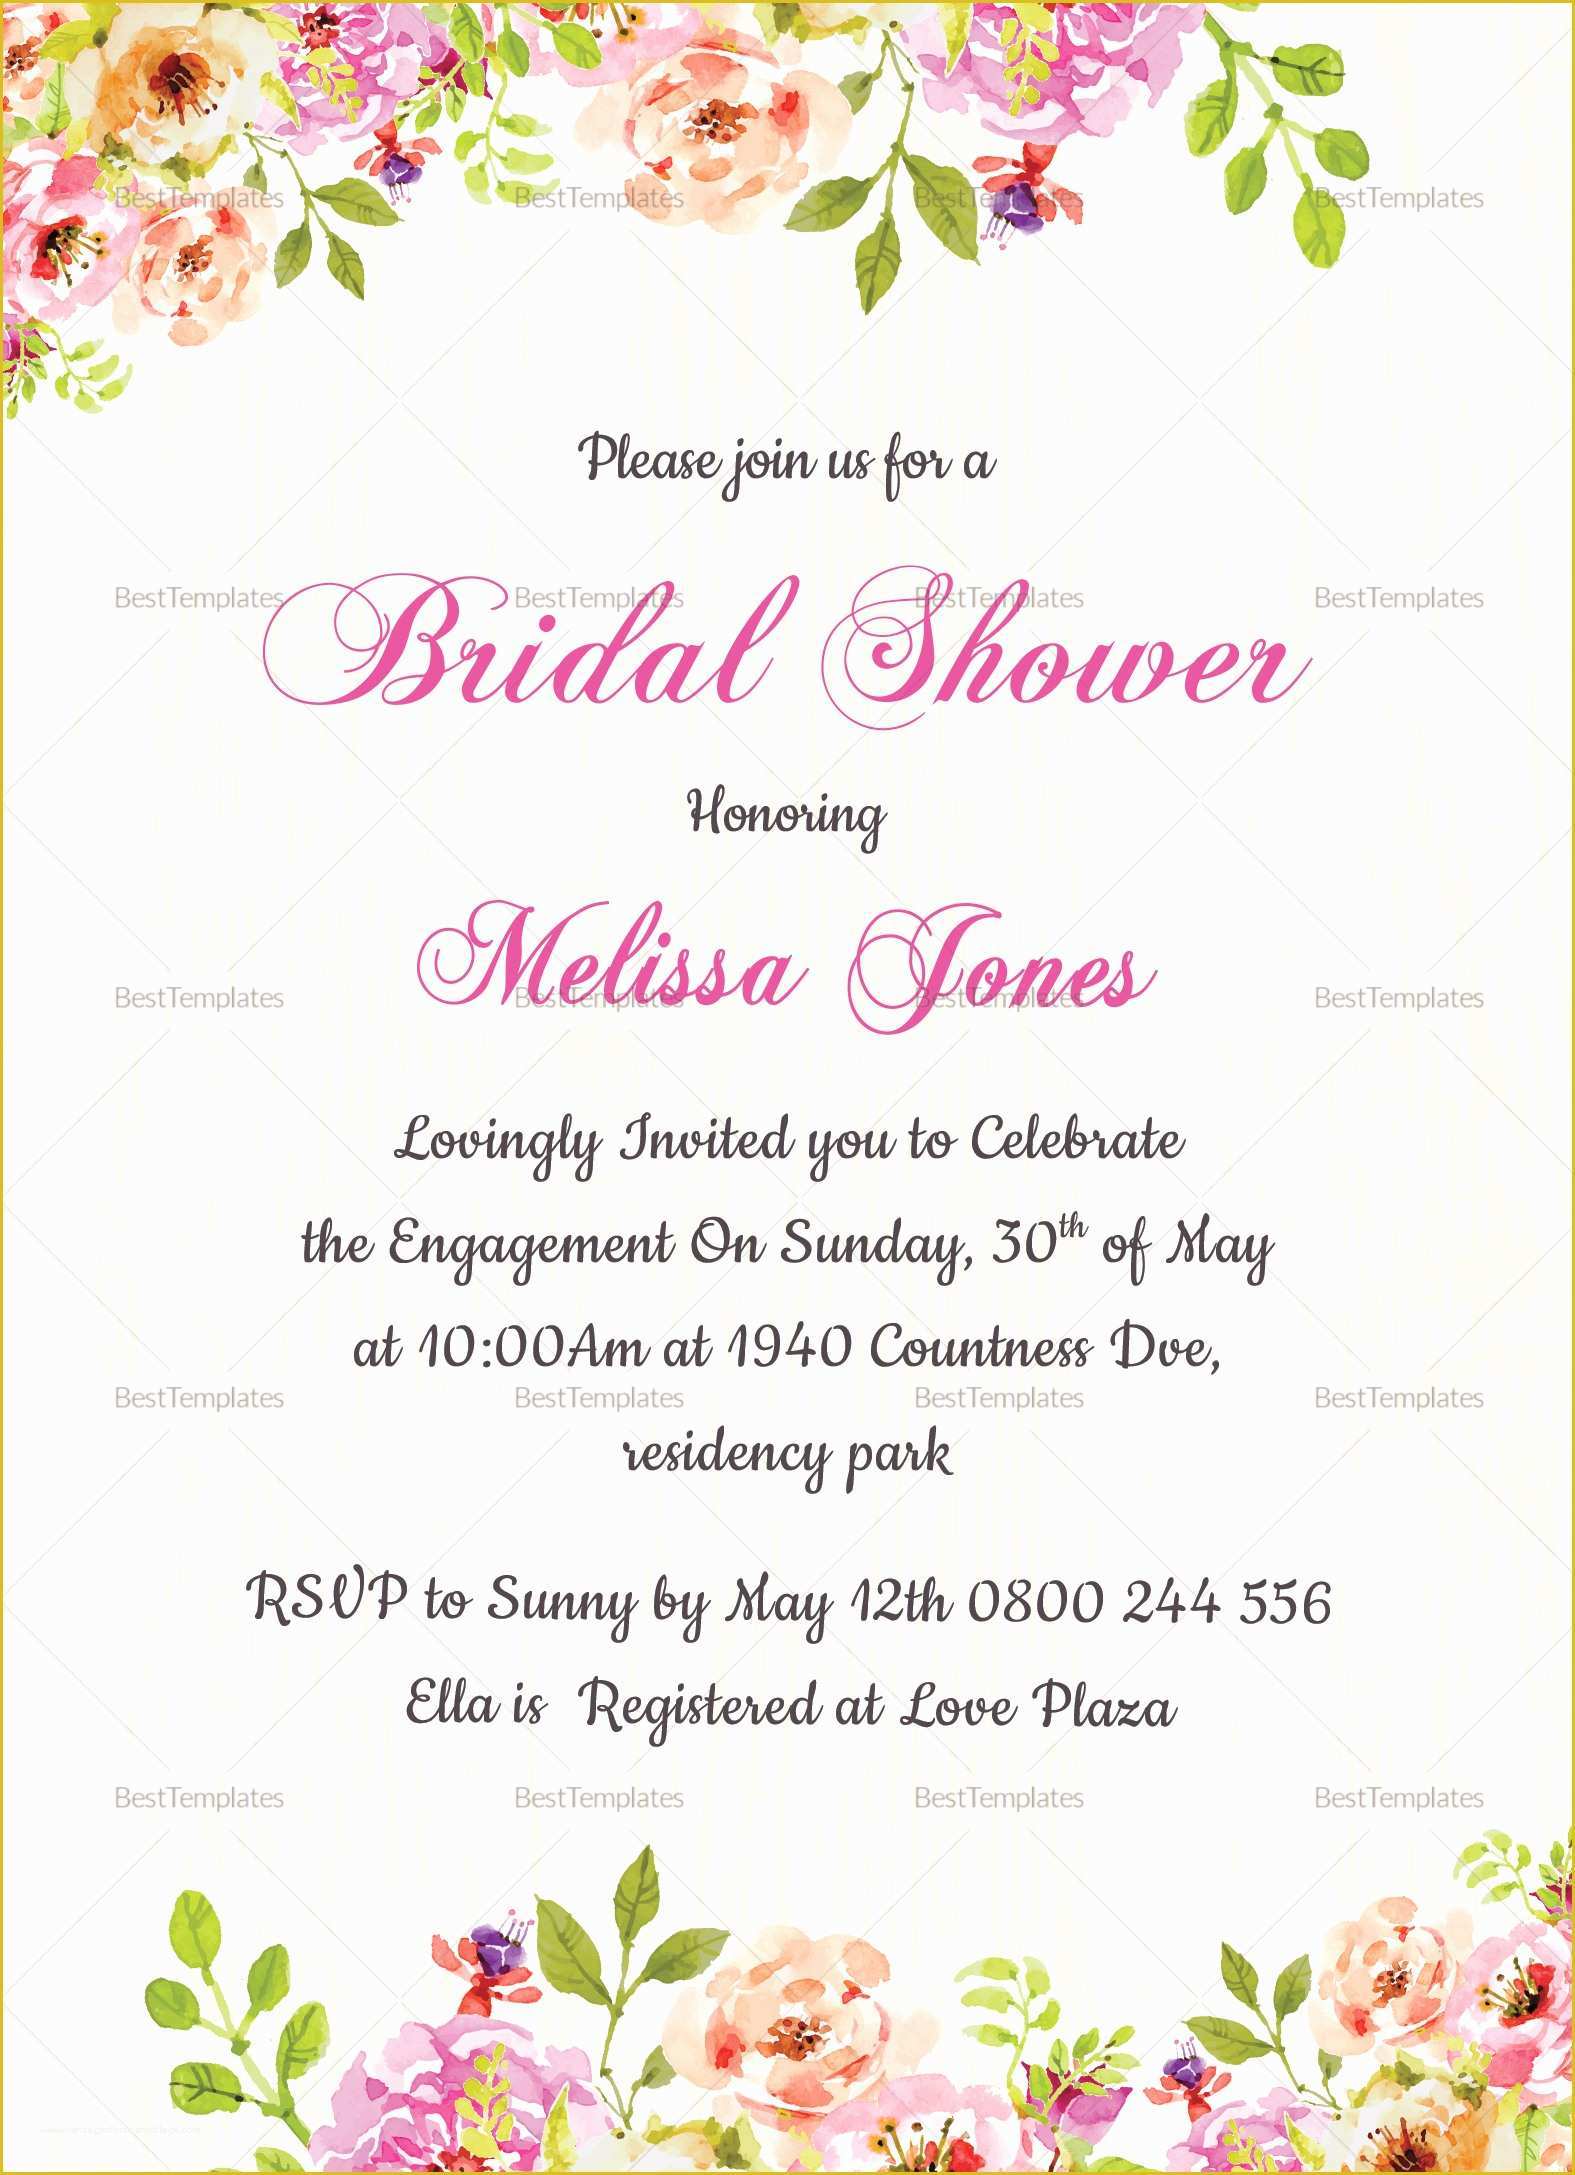 Free Bridal Shower Invitation Templates for Word Of Floral Bridal Shower Invitation Card Design Template In